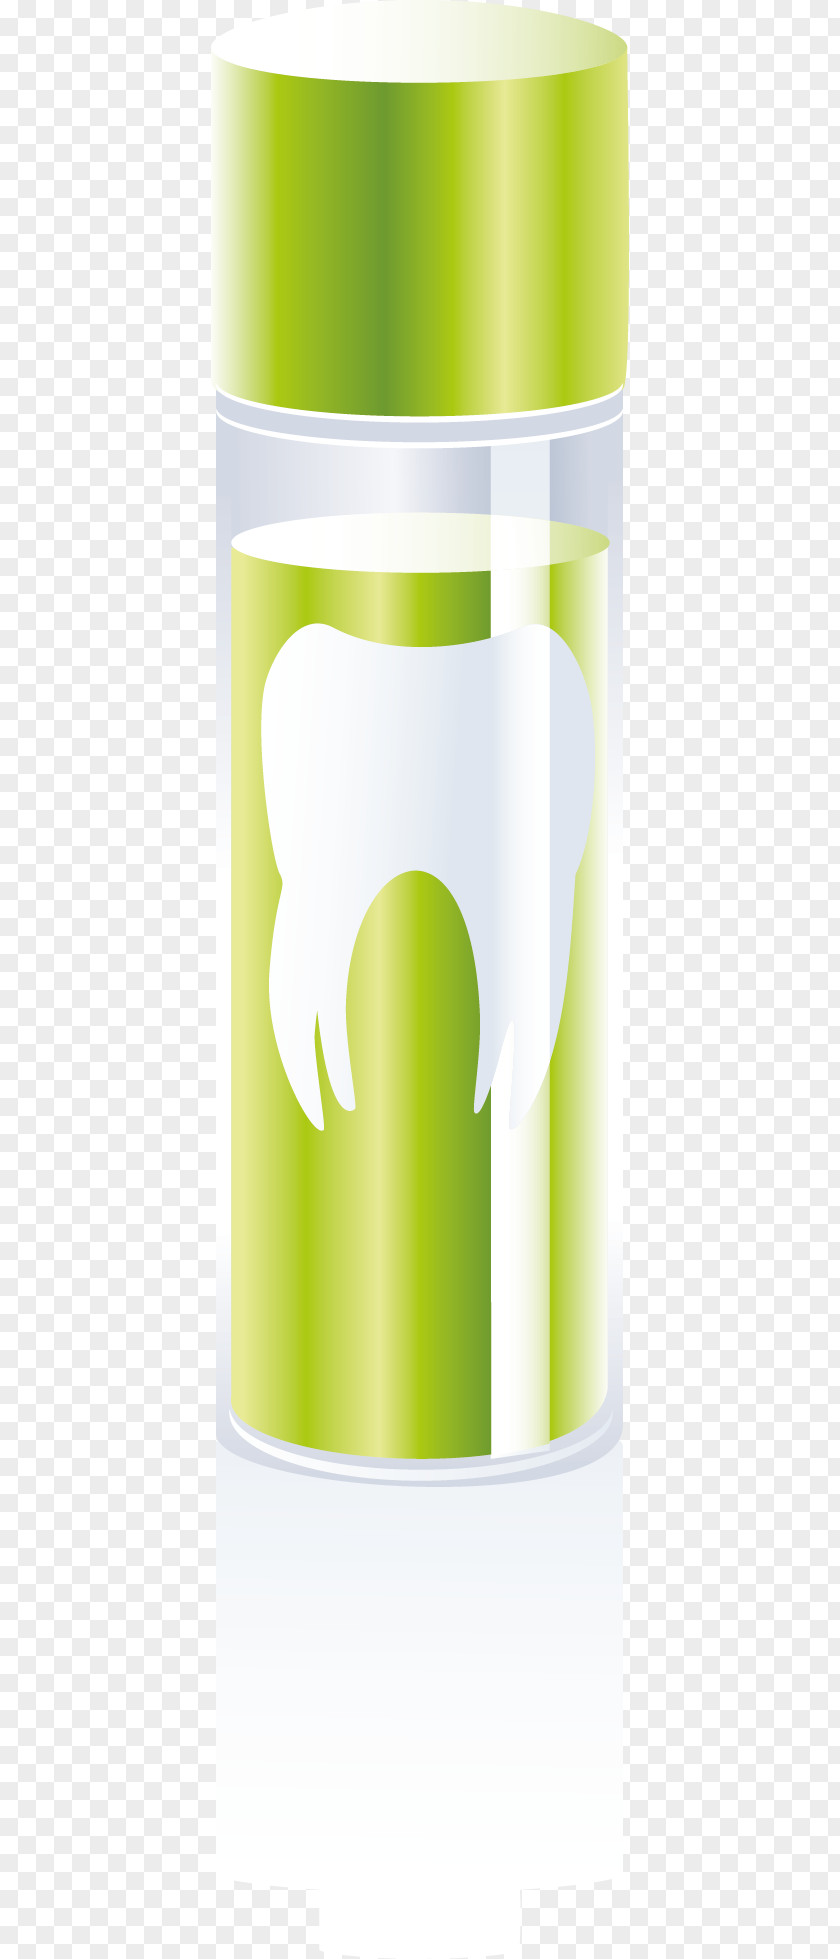 A Beautiful Picture Of Bottle Teeth Mouthwash Tooth Euclidean Vector PNG